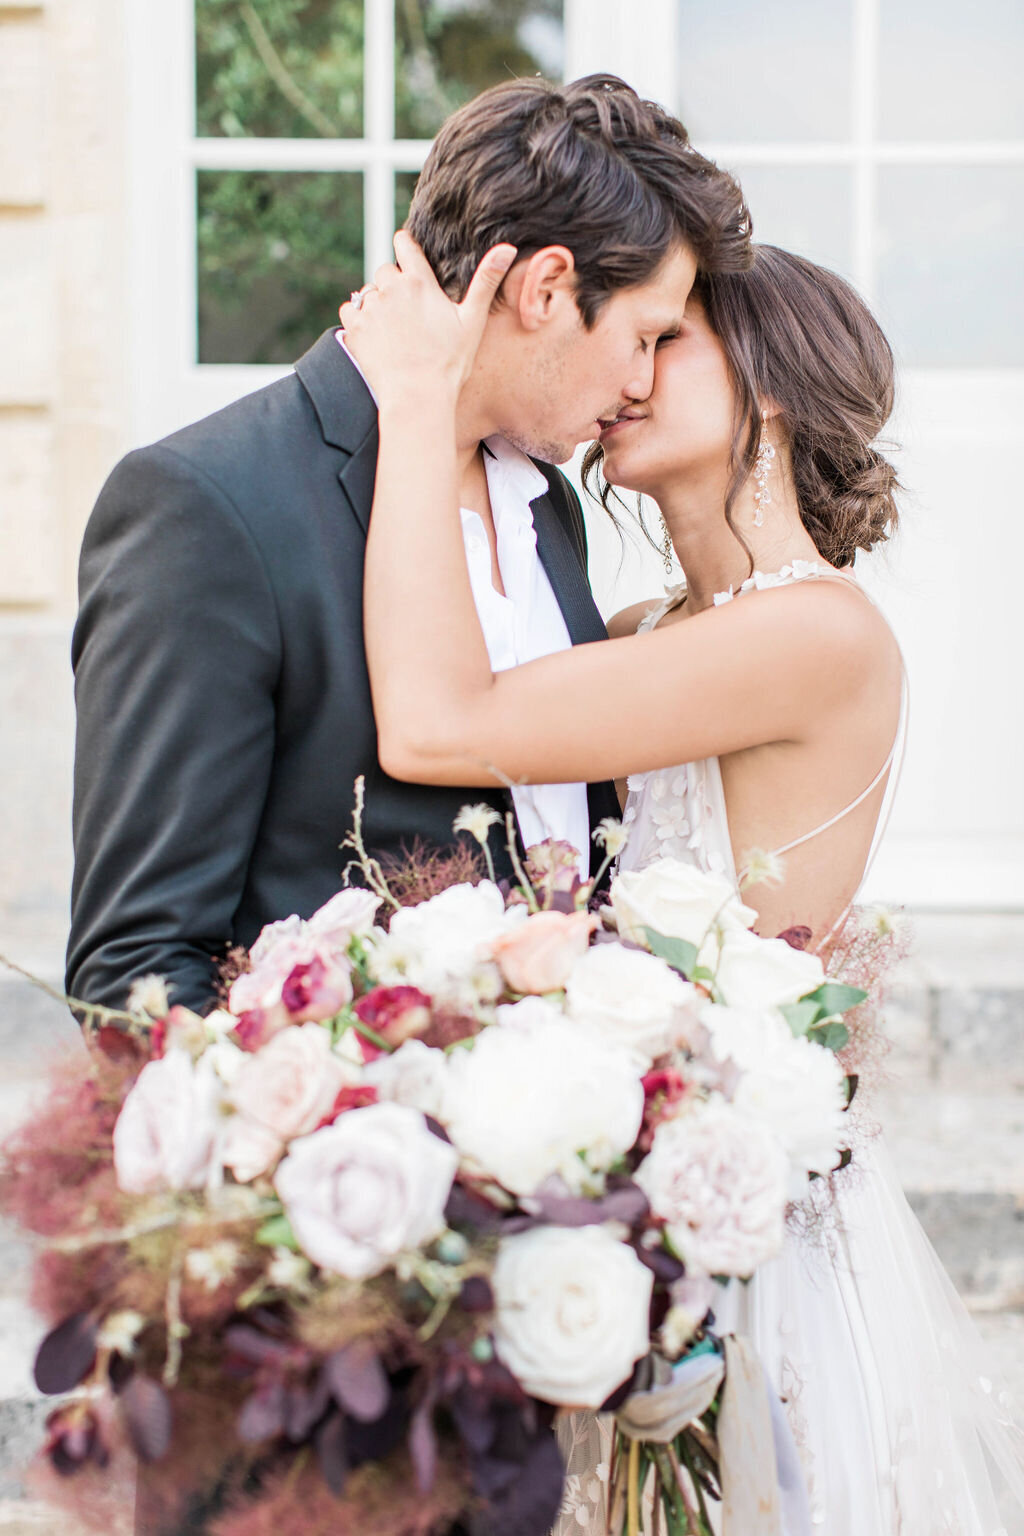 Destination Photographer Paige Michelle Photography Light and Airy Bride and Groom at wedding venue